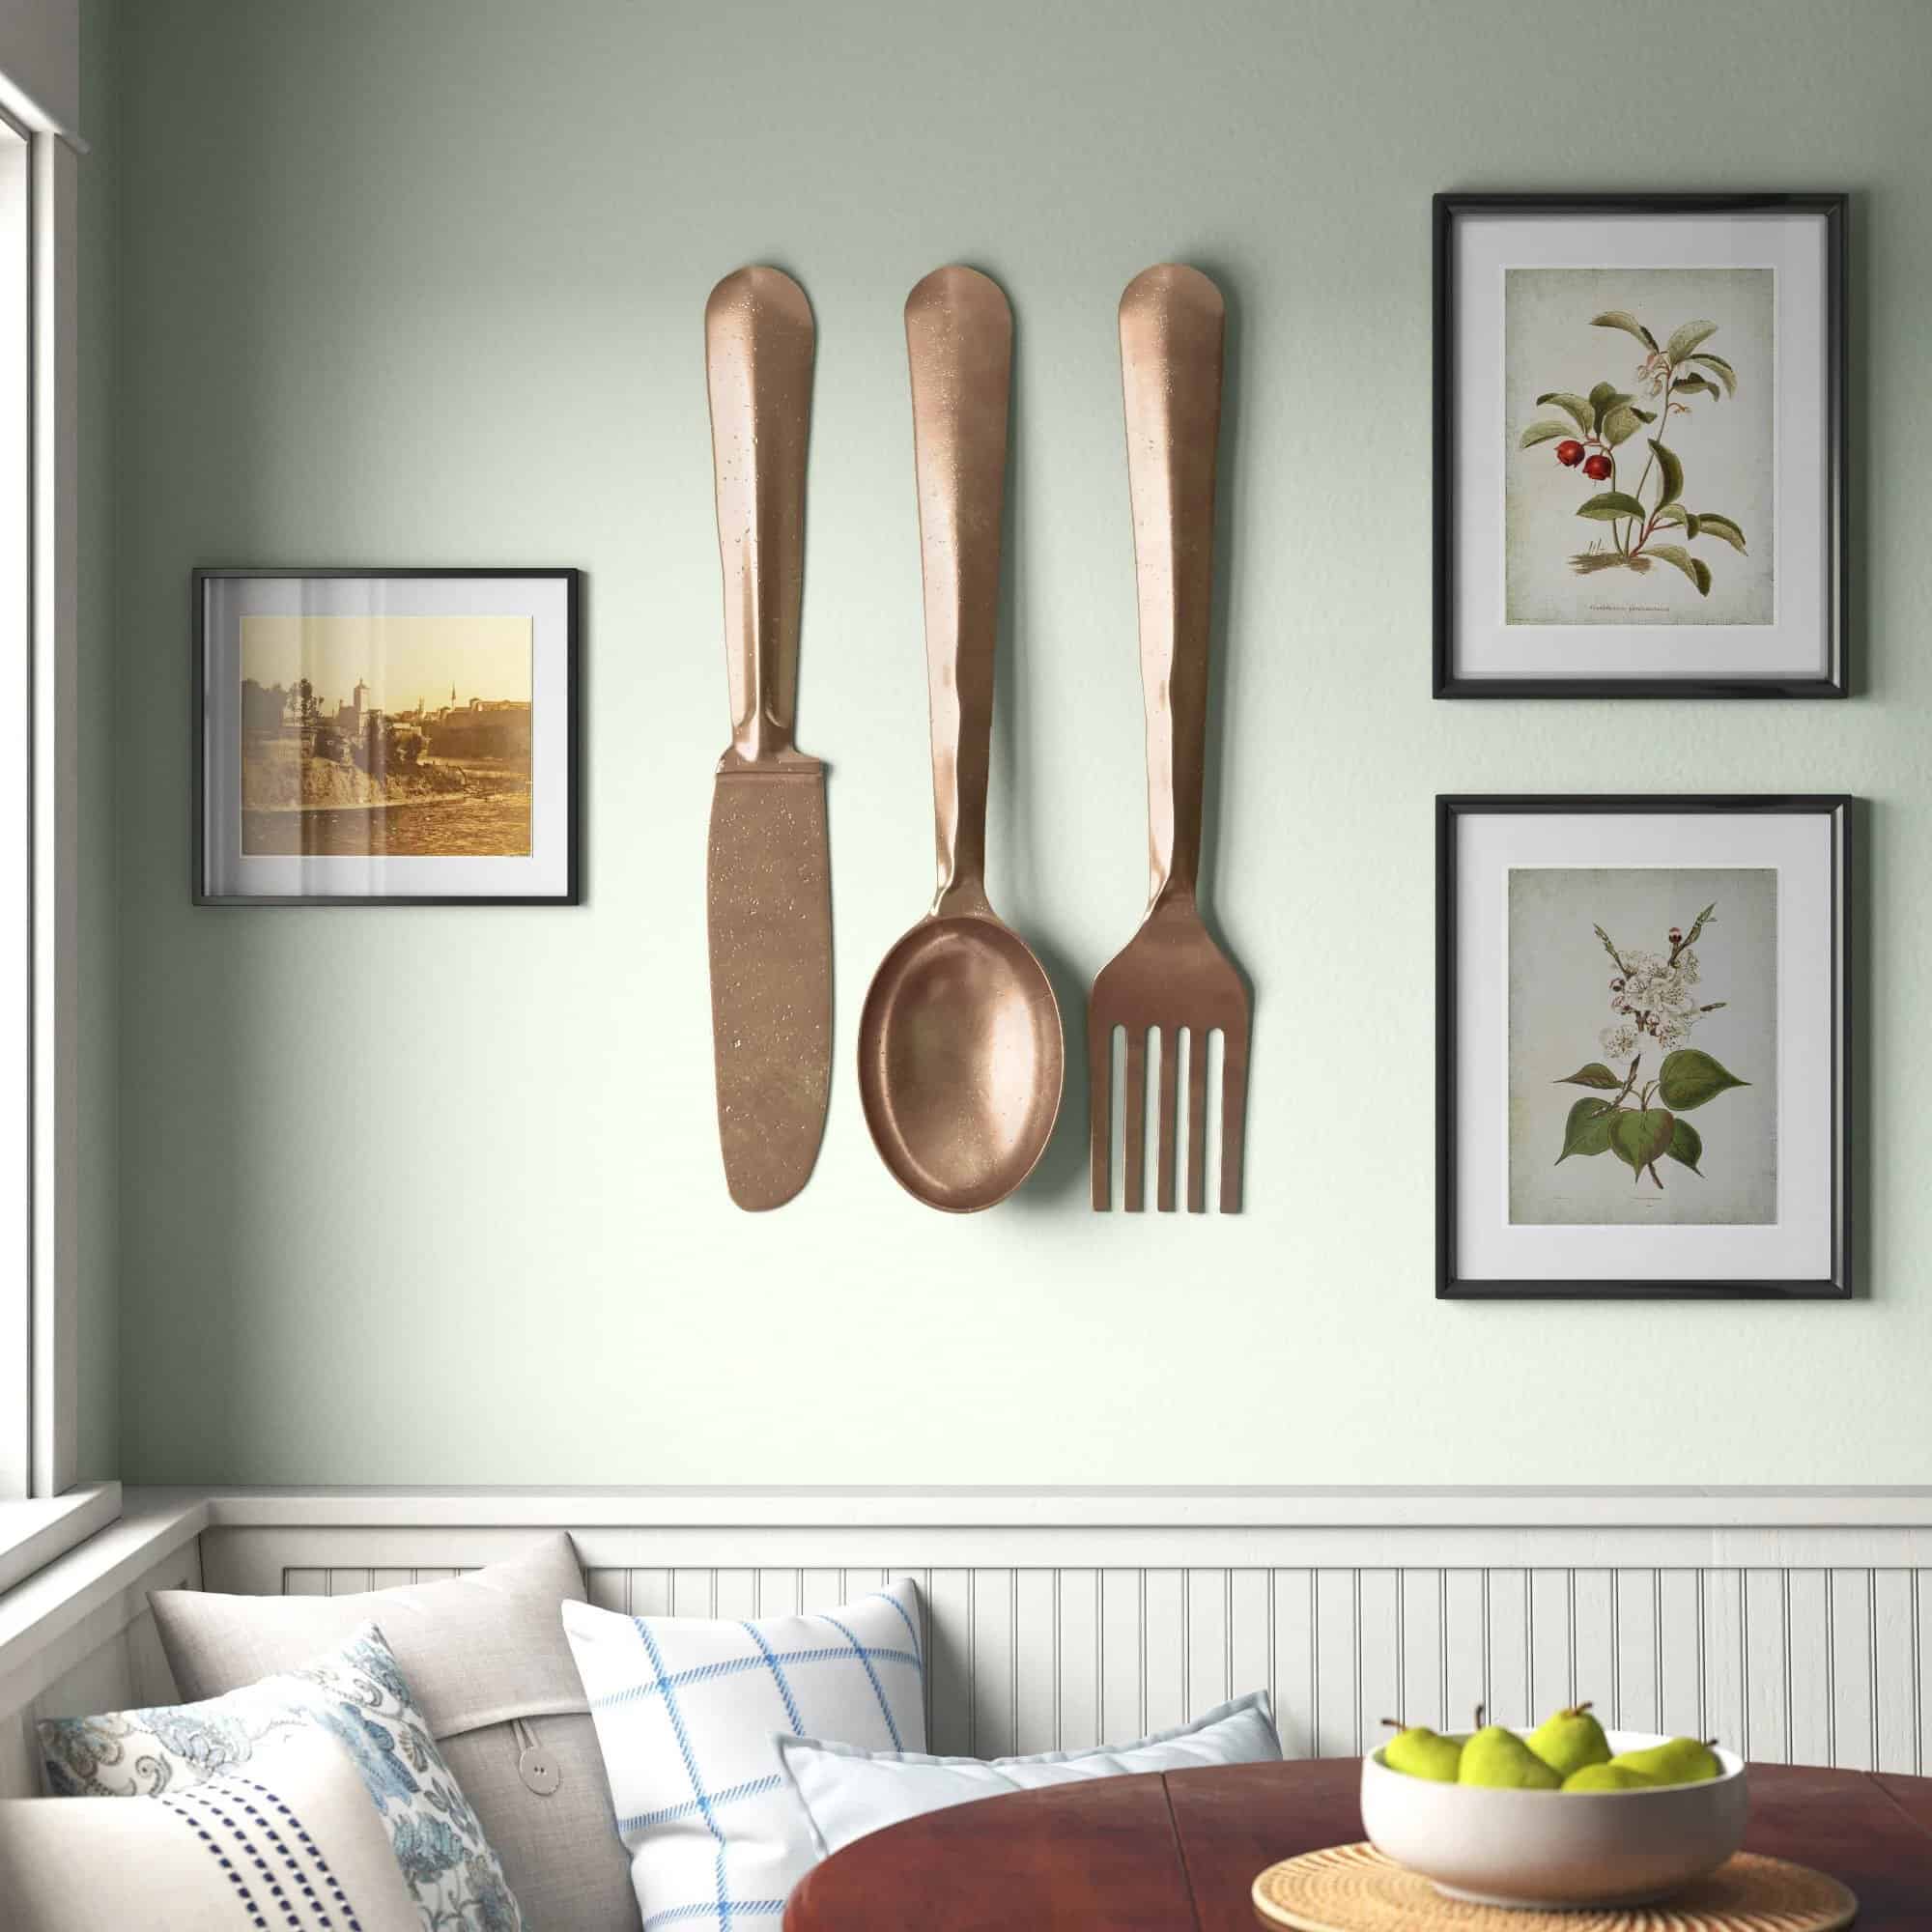 These Large Cooking Utensils Make For Unconventional Yet Gorgeous Wall Decor